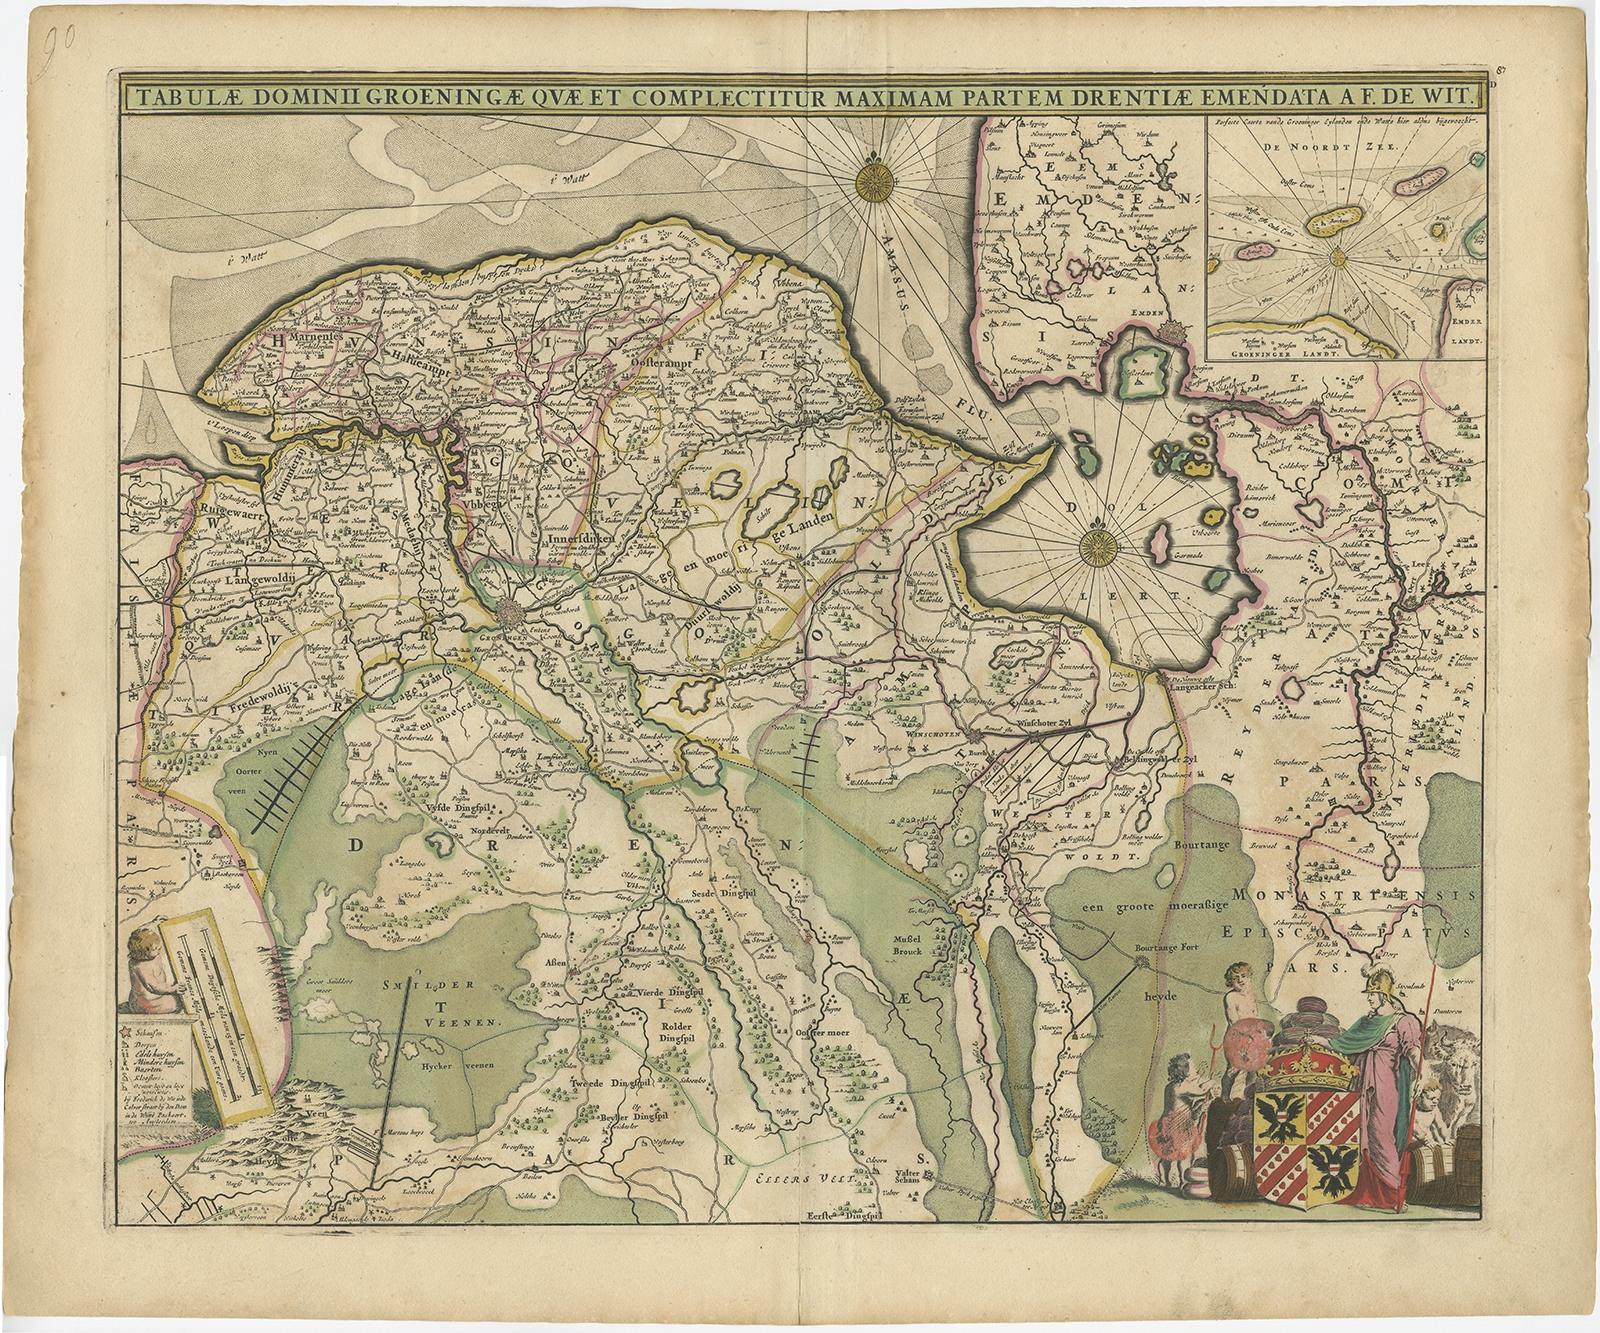 Antique map titled 'Tabulae dominii Groeningae quae et complecitur maximam partem Drentiae Emendata'. 

Old map of the province of Groningen, the Netherlands. With an inset map of the northern tip of Emden. 

Artists and Engravers: De Wit (1629